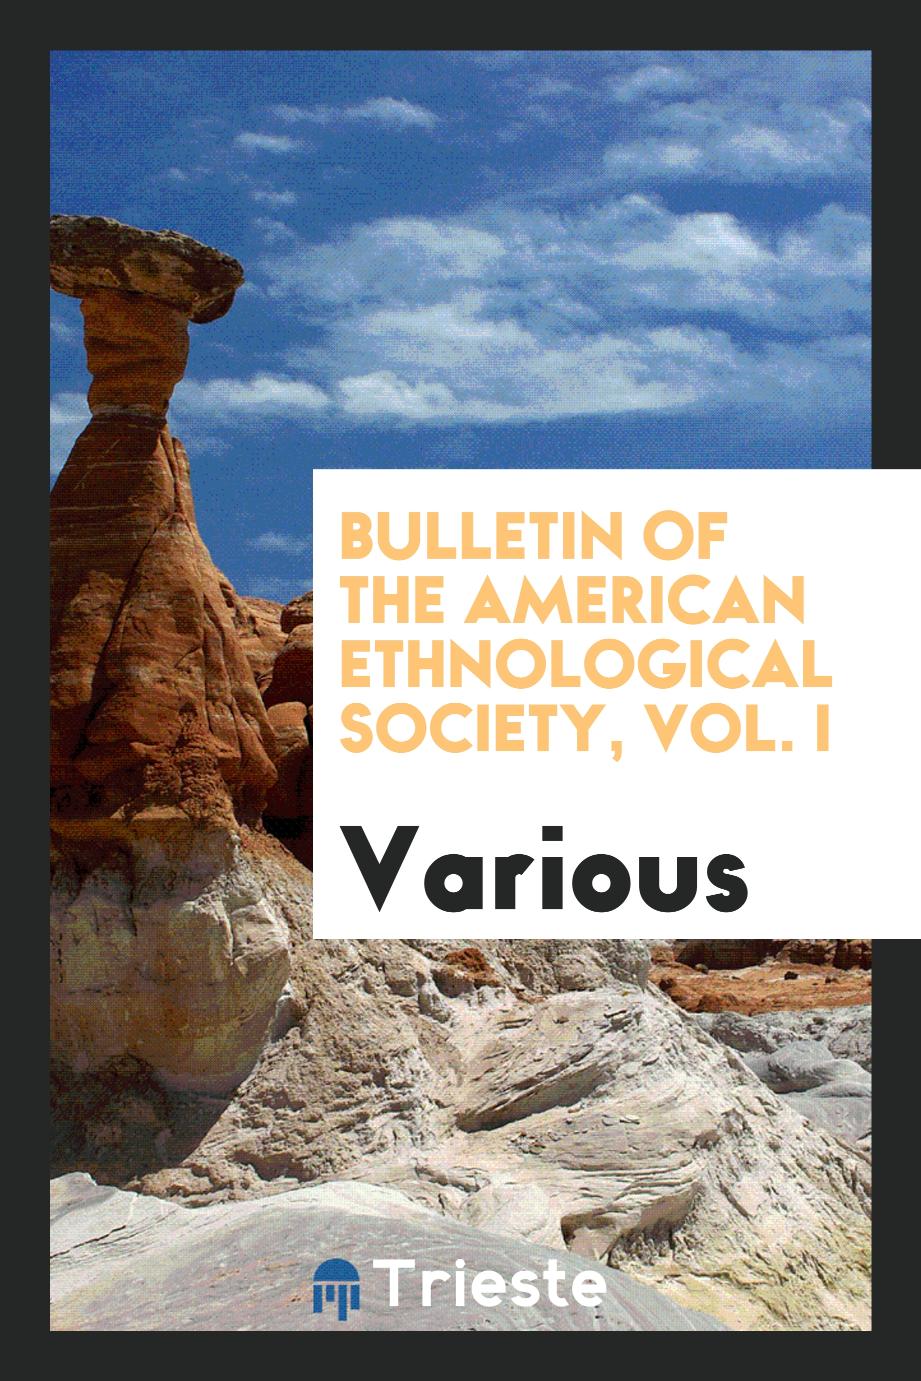 Bulletin of the American Ethnological Society, Vol. I